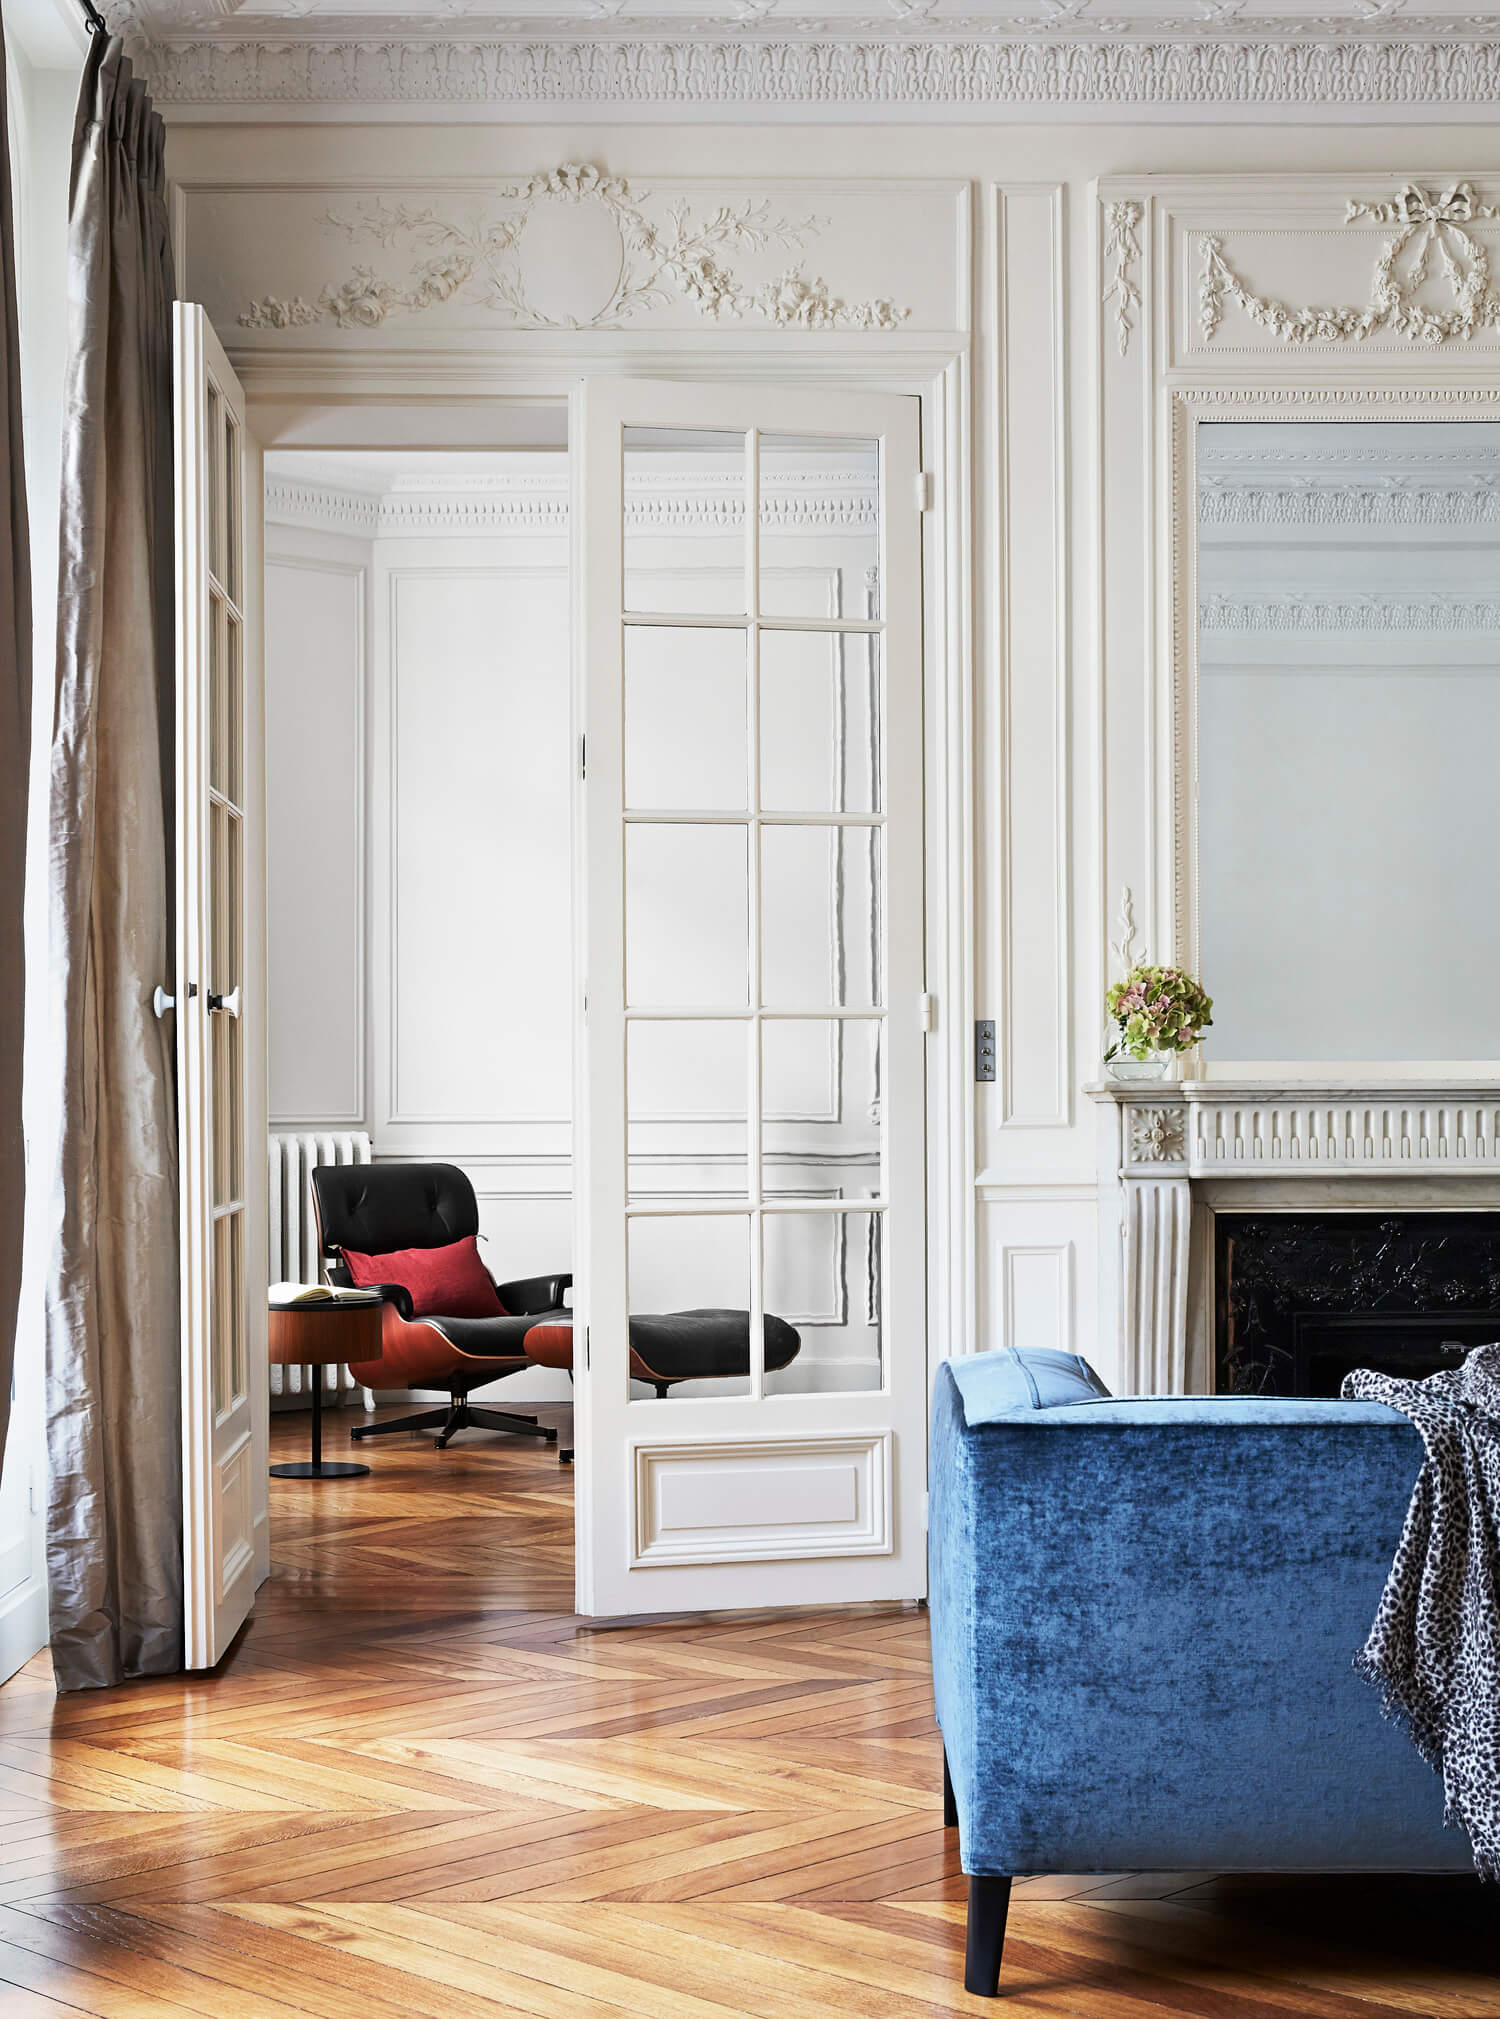 French Interior Design Tips To Decorate Your Home | Hommés Studio